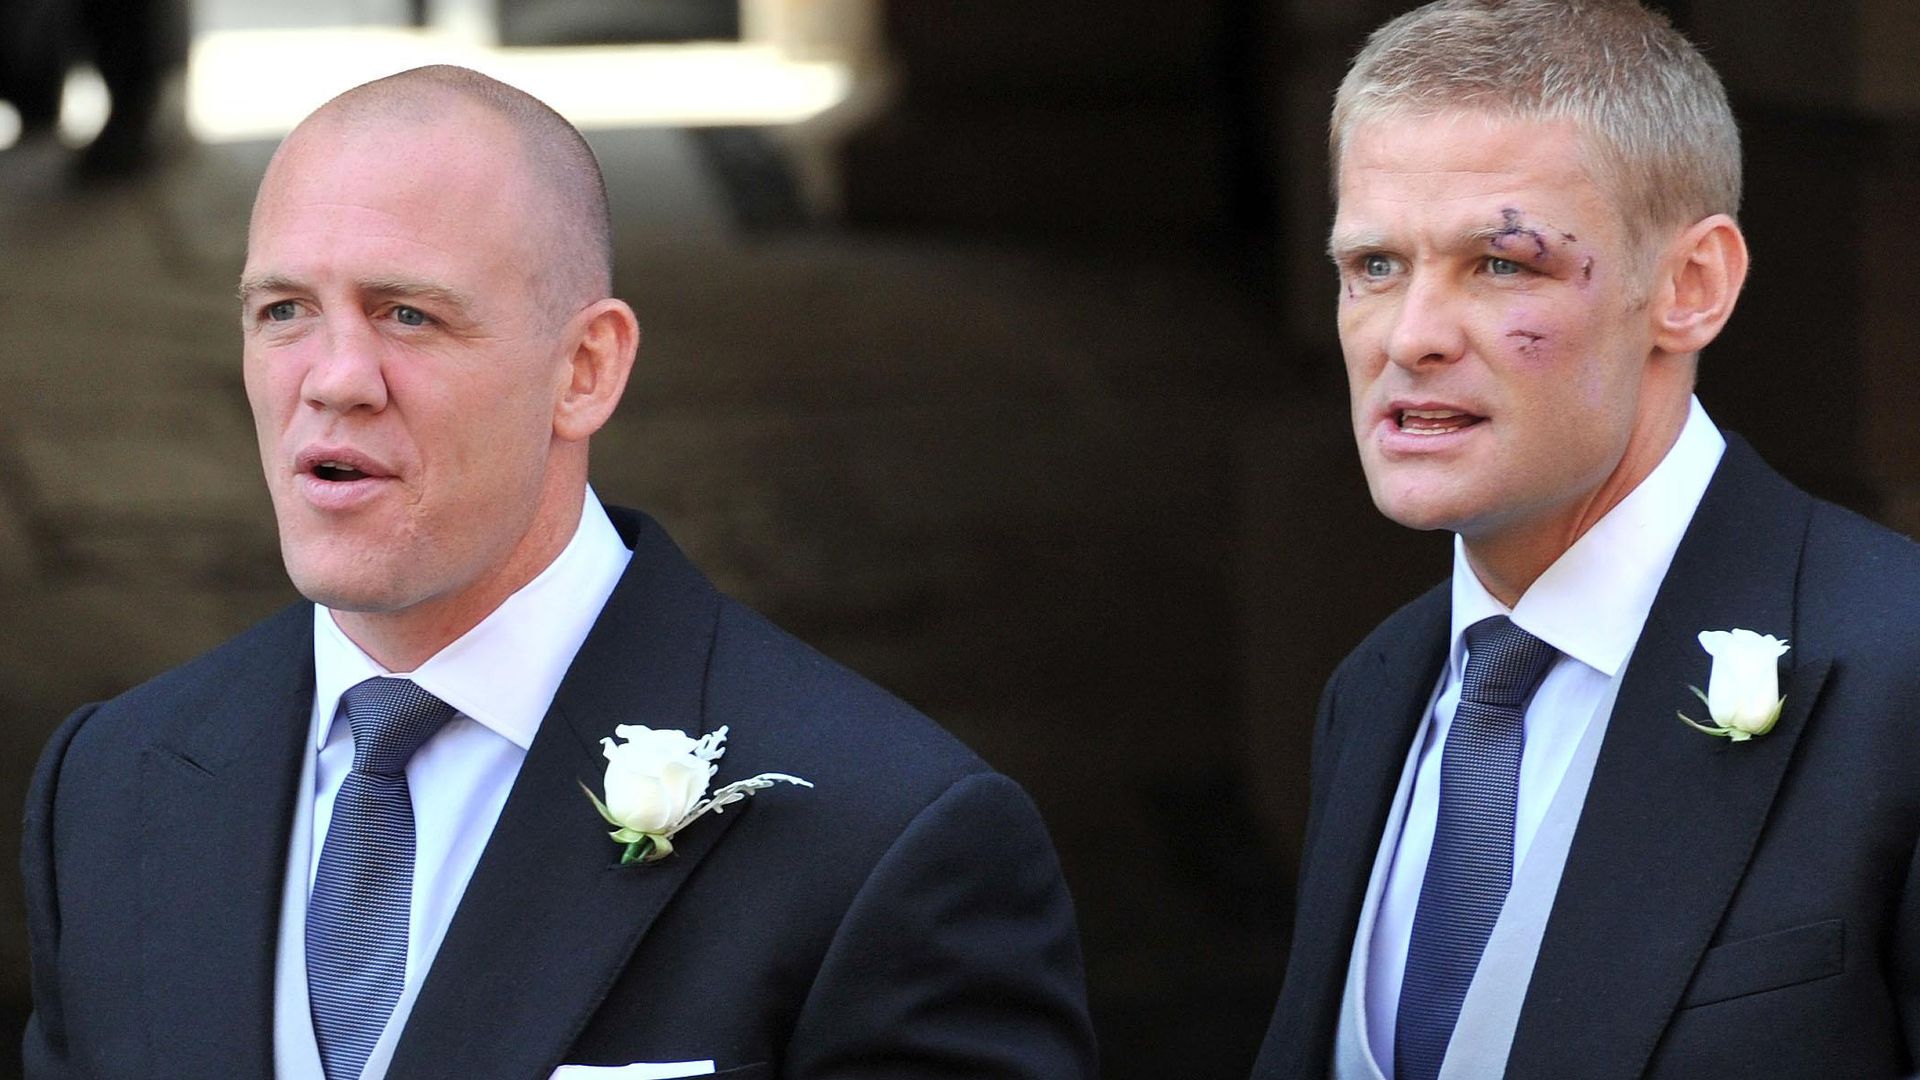 Mike Tindall and his best man Iain on his wedding day with Zara Tindall